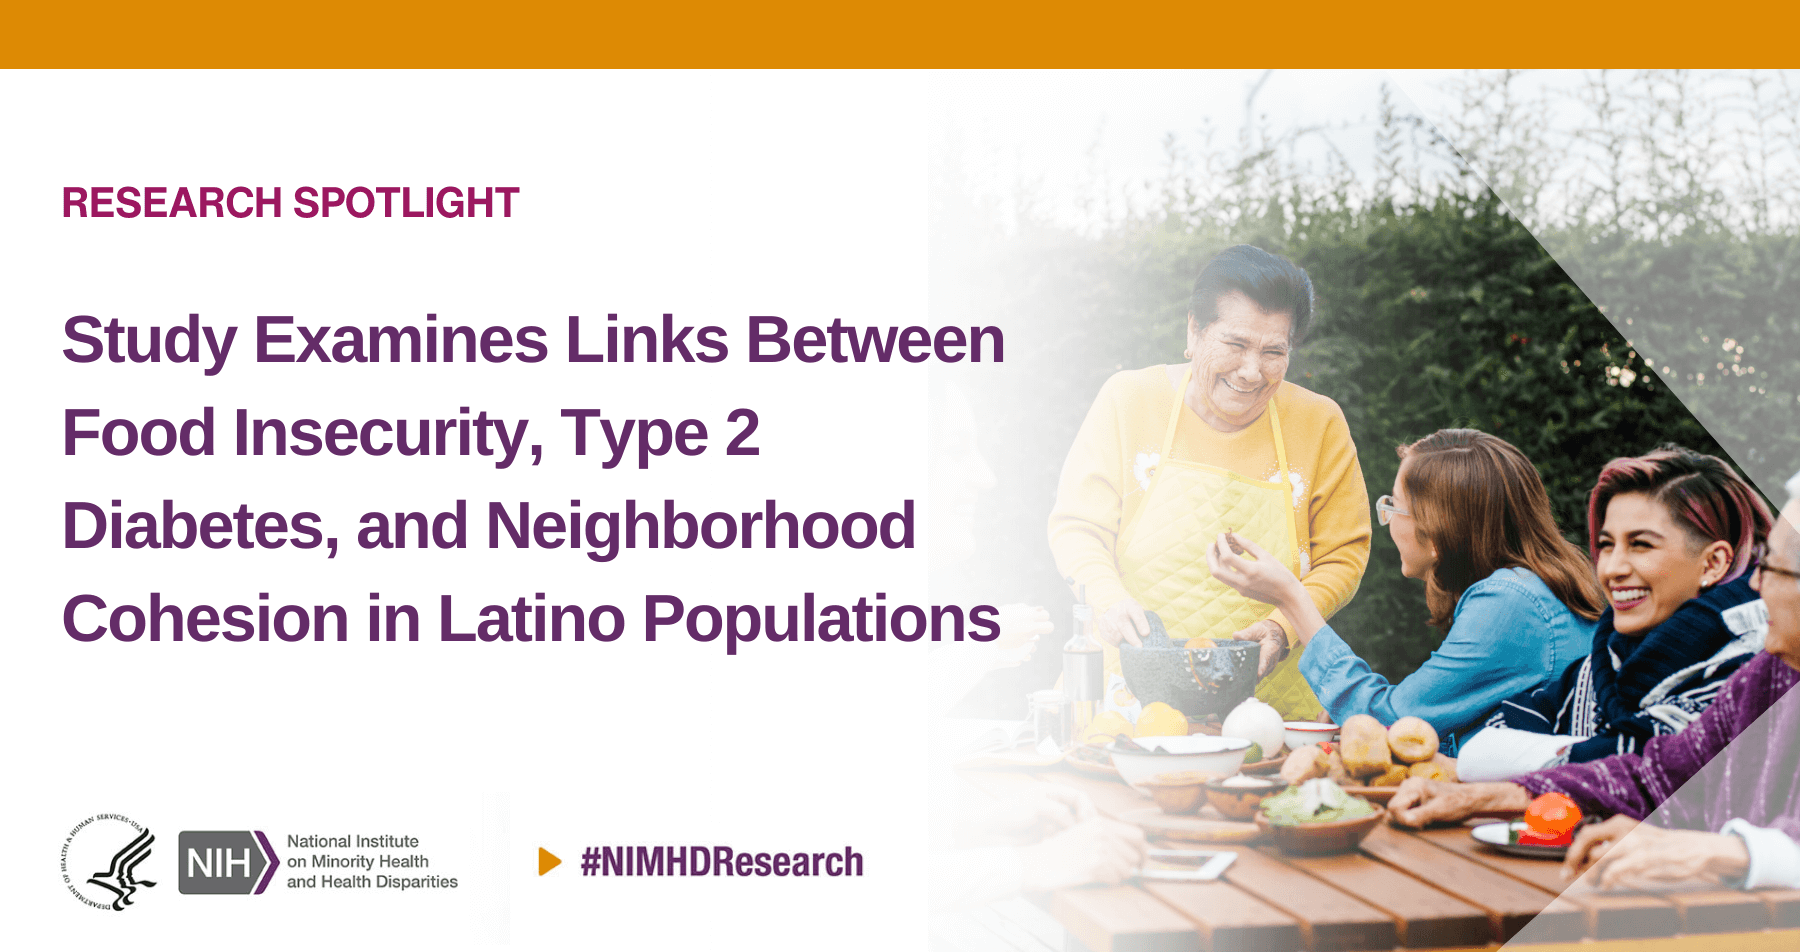 NIMHD Research Spotlight. Photo: A group of women of Latino descent interact outdoors around a table; 1 stands at the head, working a mortar and pestle